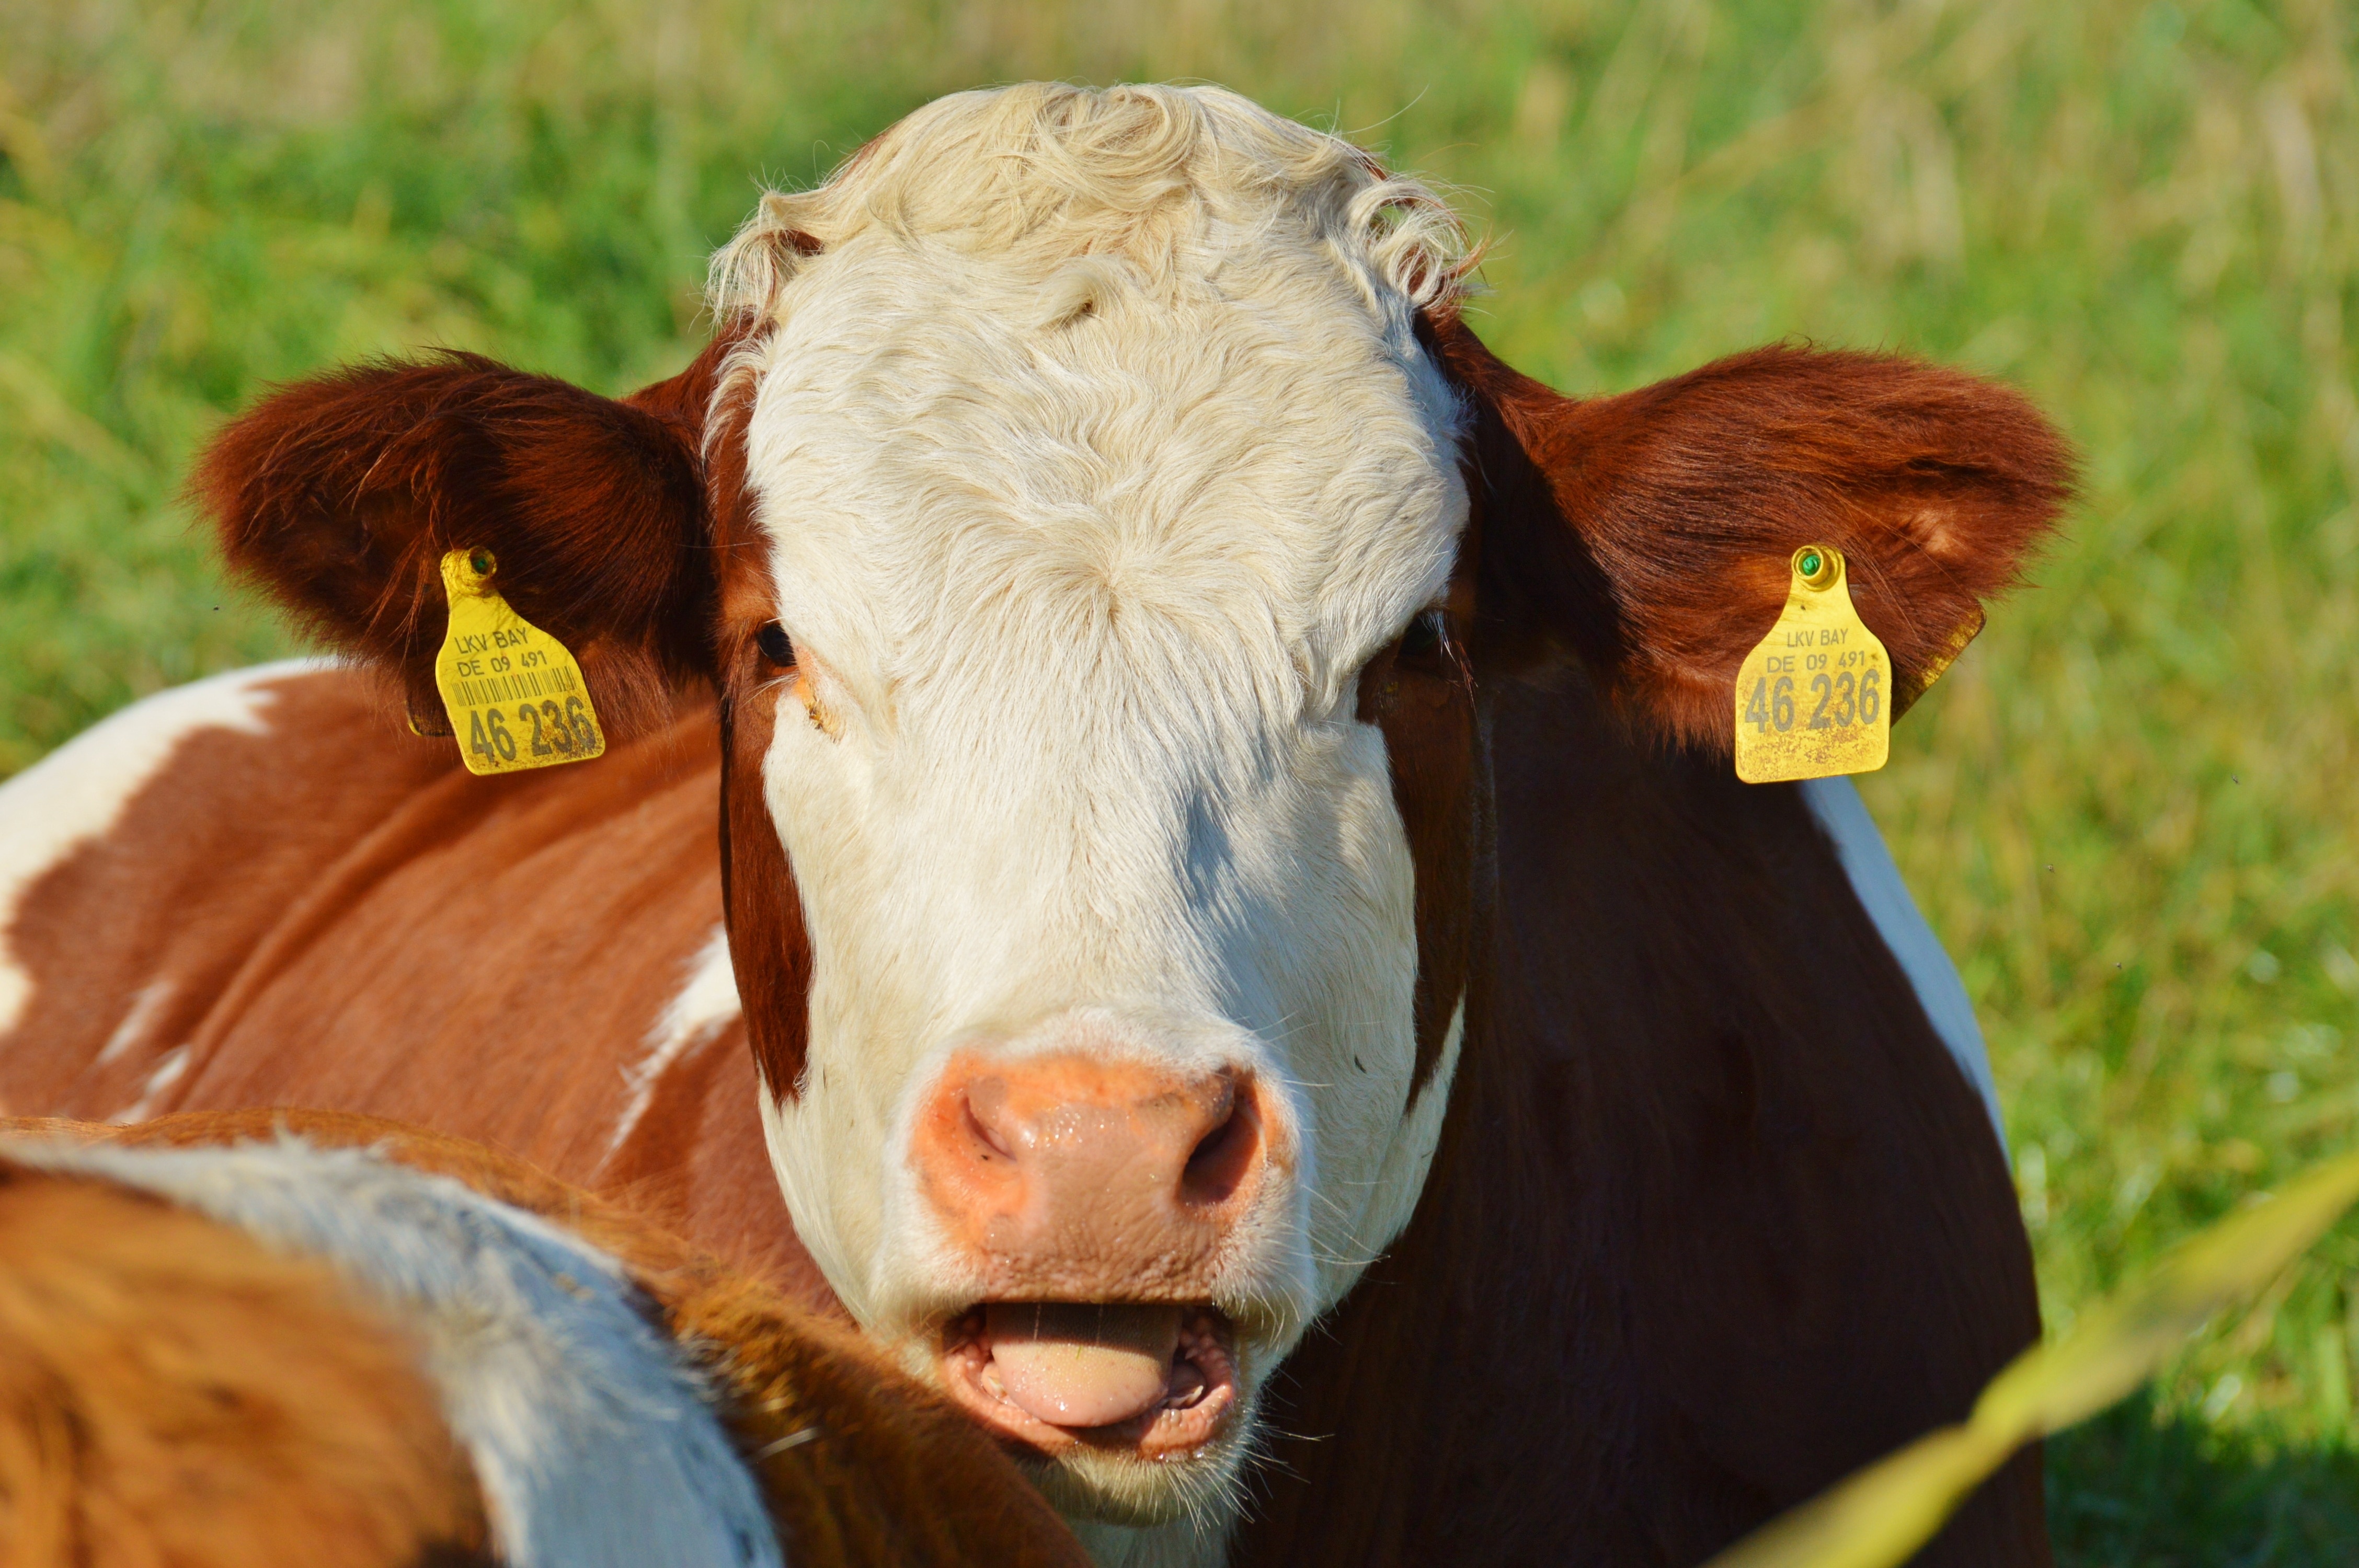 selective focus photography of land cattle